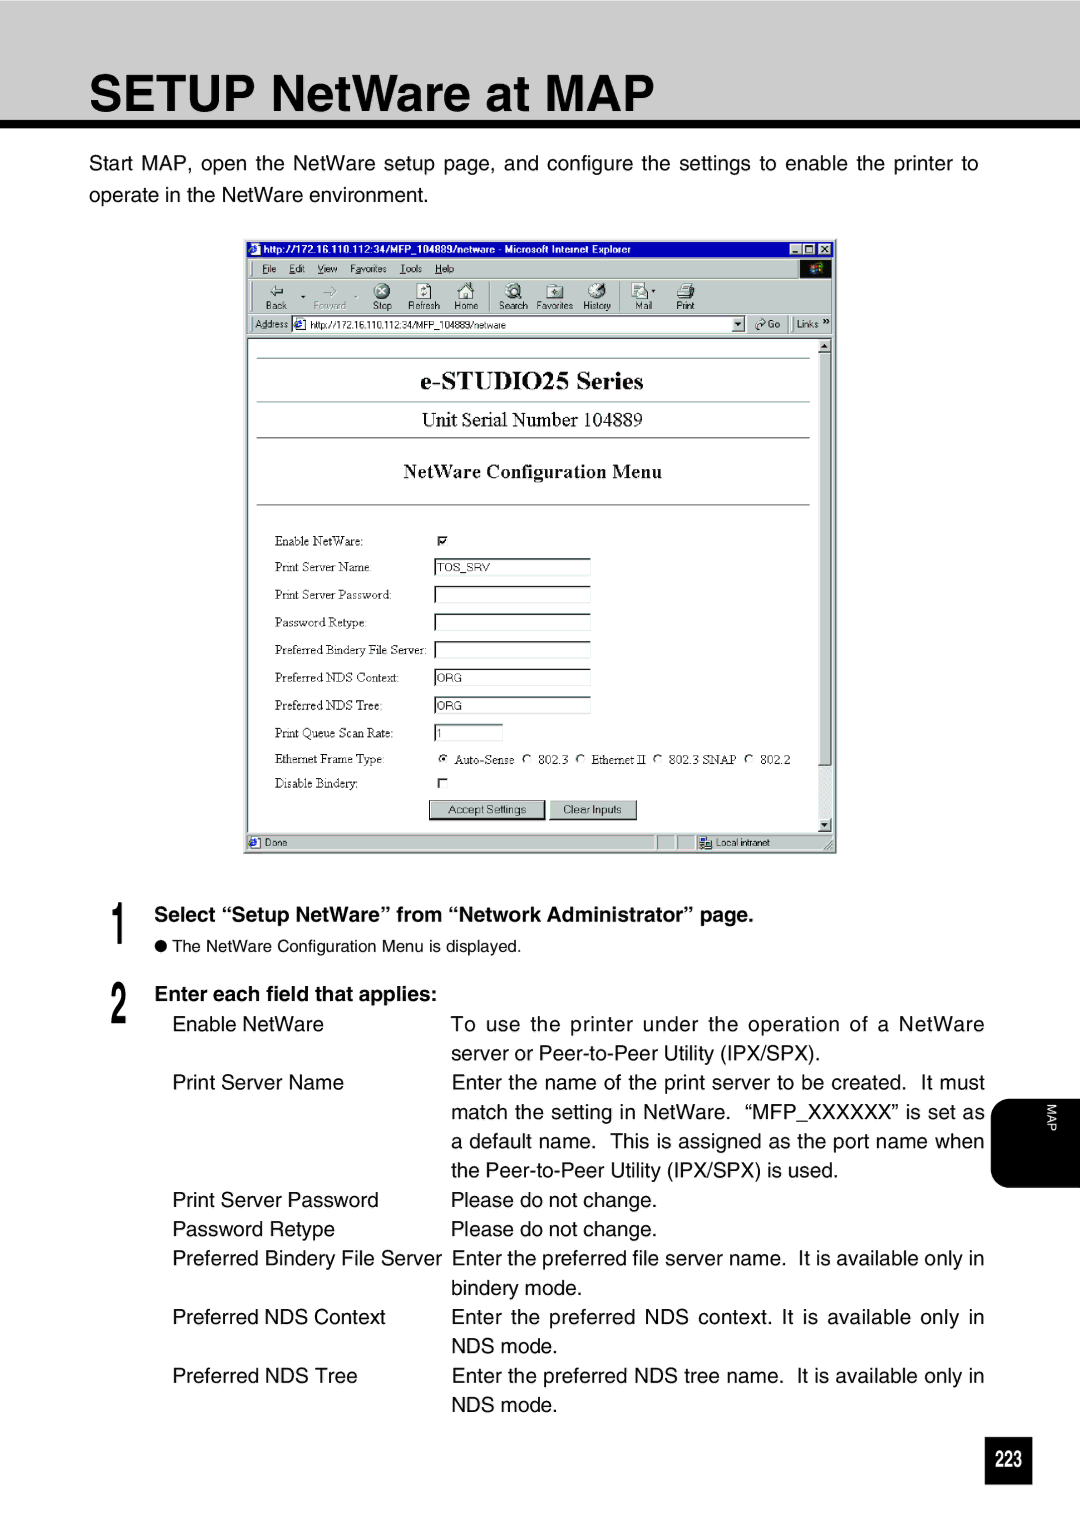 Toshiba GA-1031 manual 223, Select Setup NetWare from Network Administrator, Enter each field that applies 